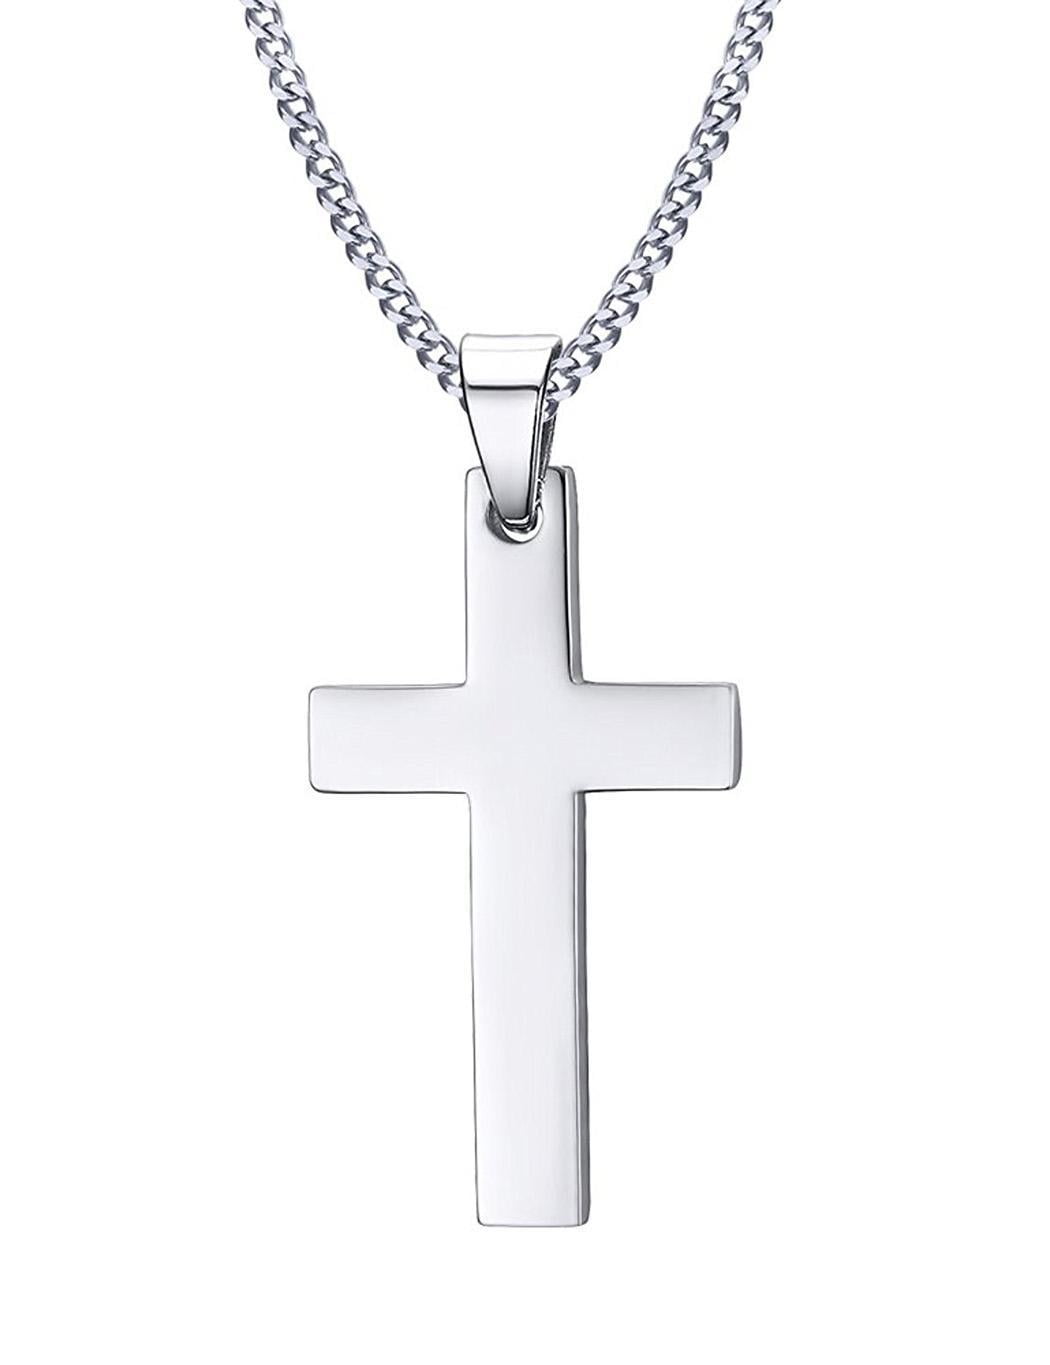 Cross Necklace for Men Figaro Chain Stainless Steel Plain Polished Cross Pendant Necklace Simple Faith Jewelry Gift for Boy Women Girls